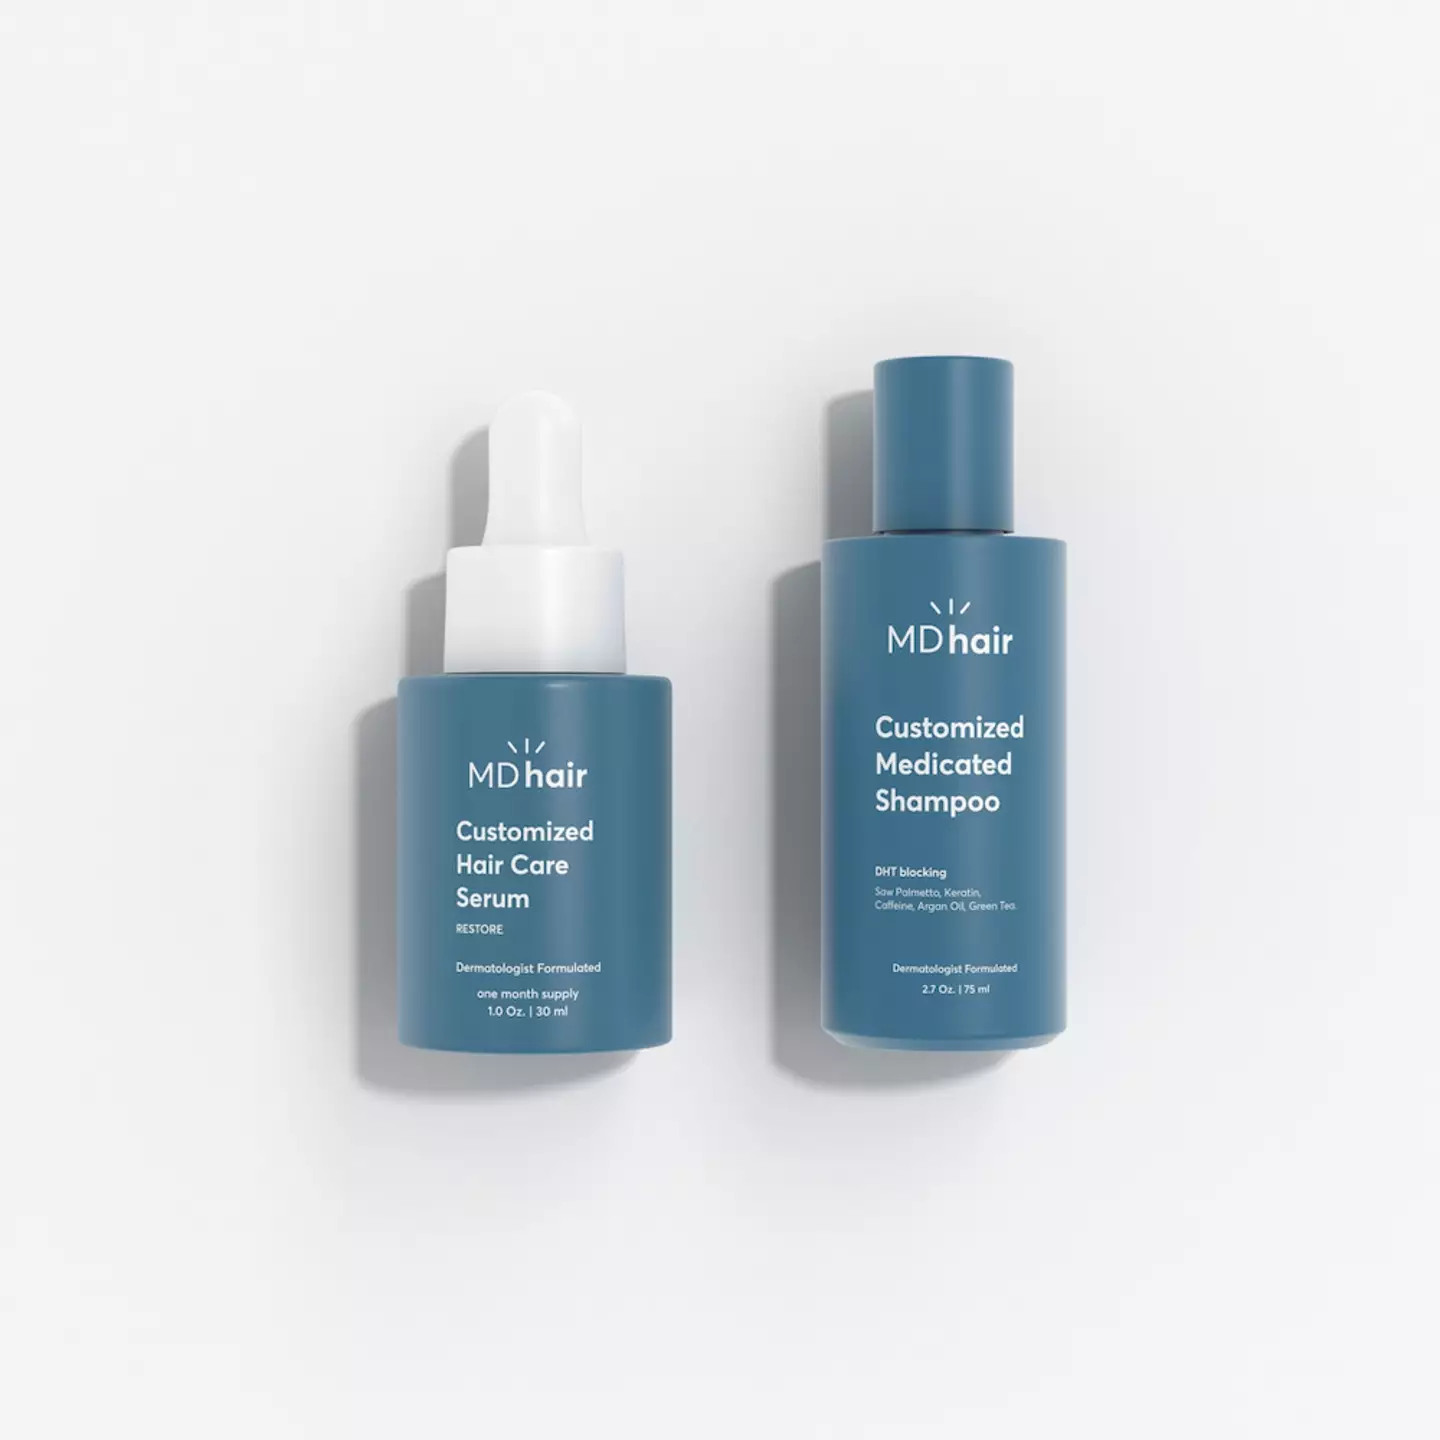 The Essential Regrowth Kit includes both the serum and an accompanying shampoo.